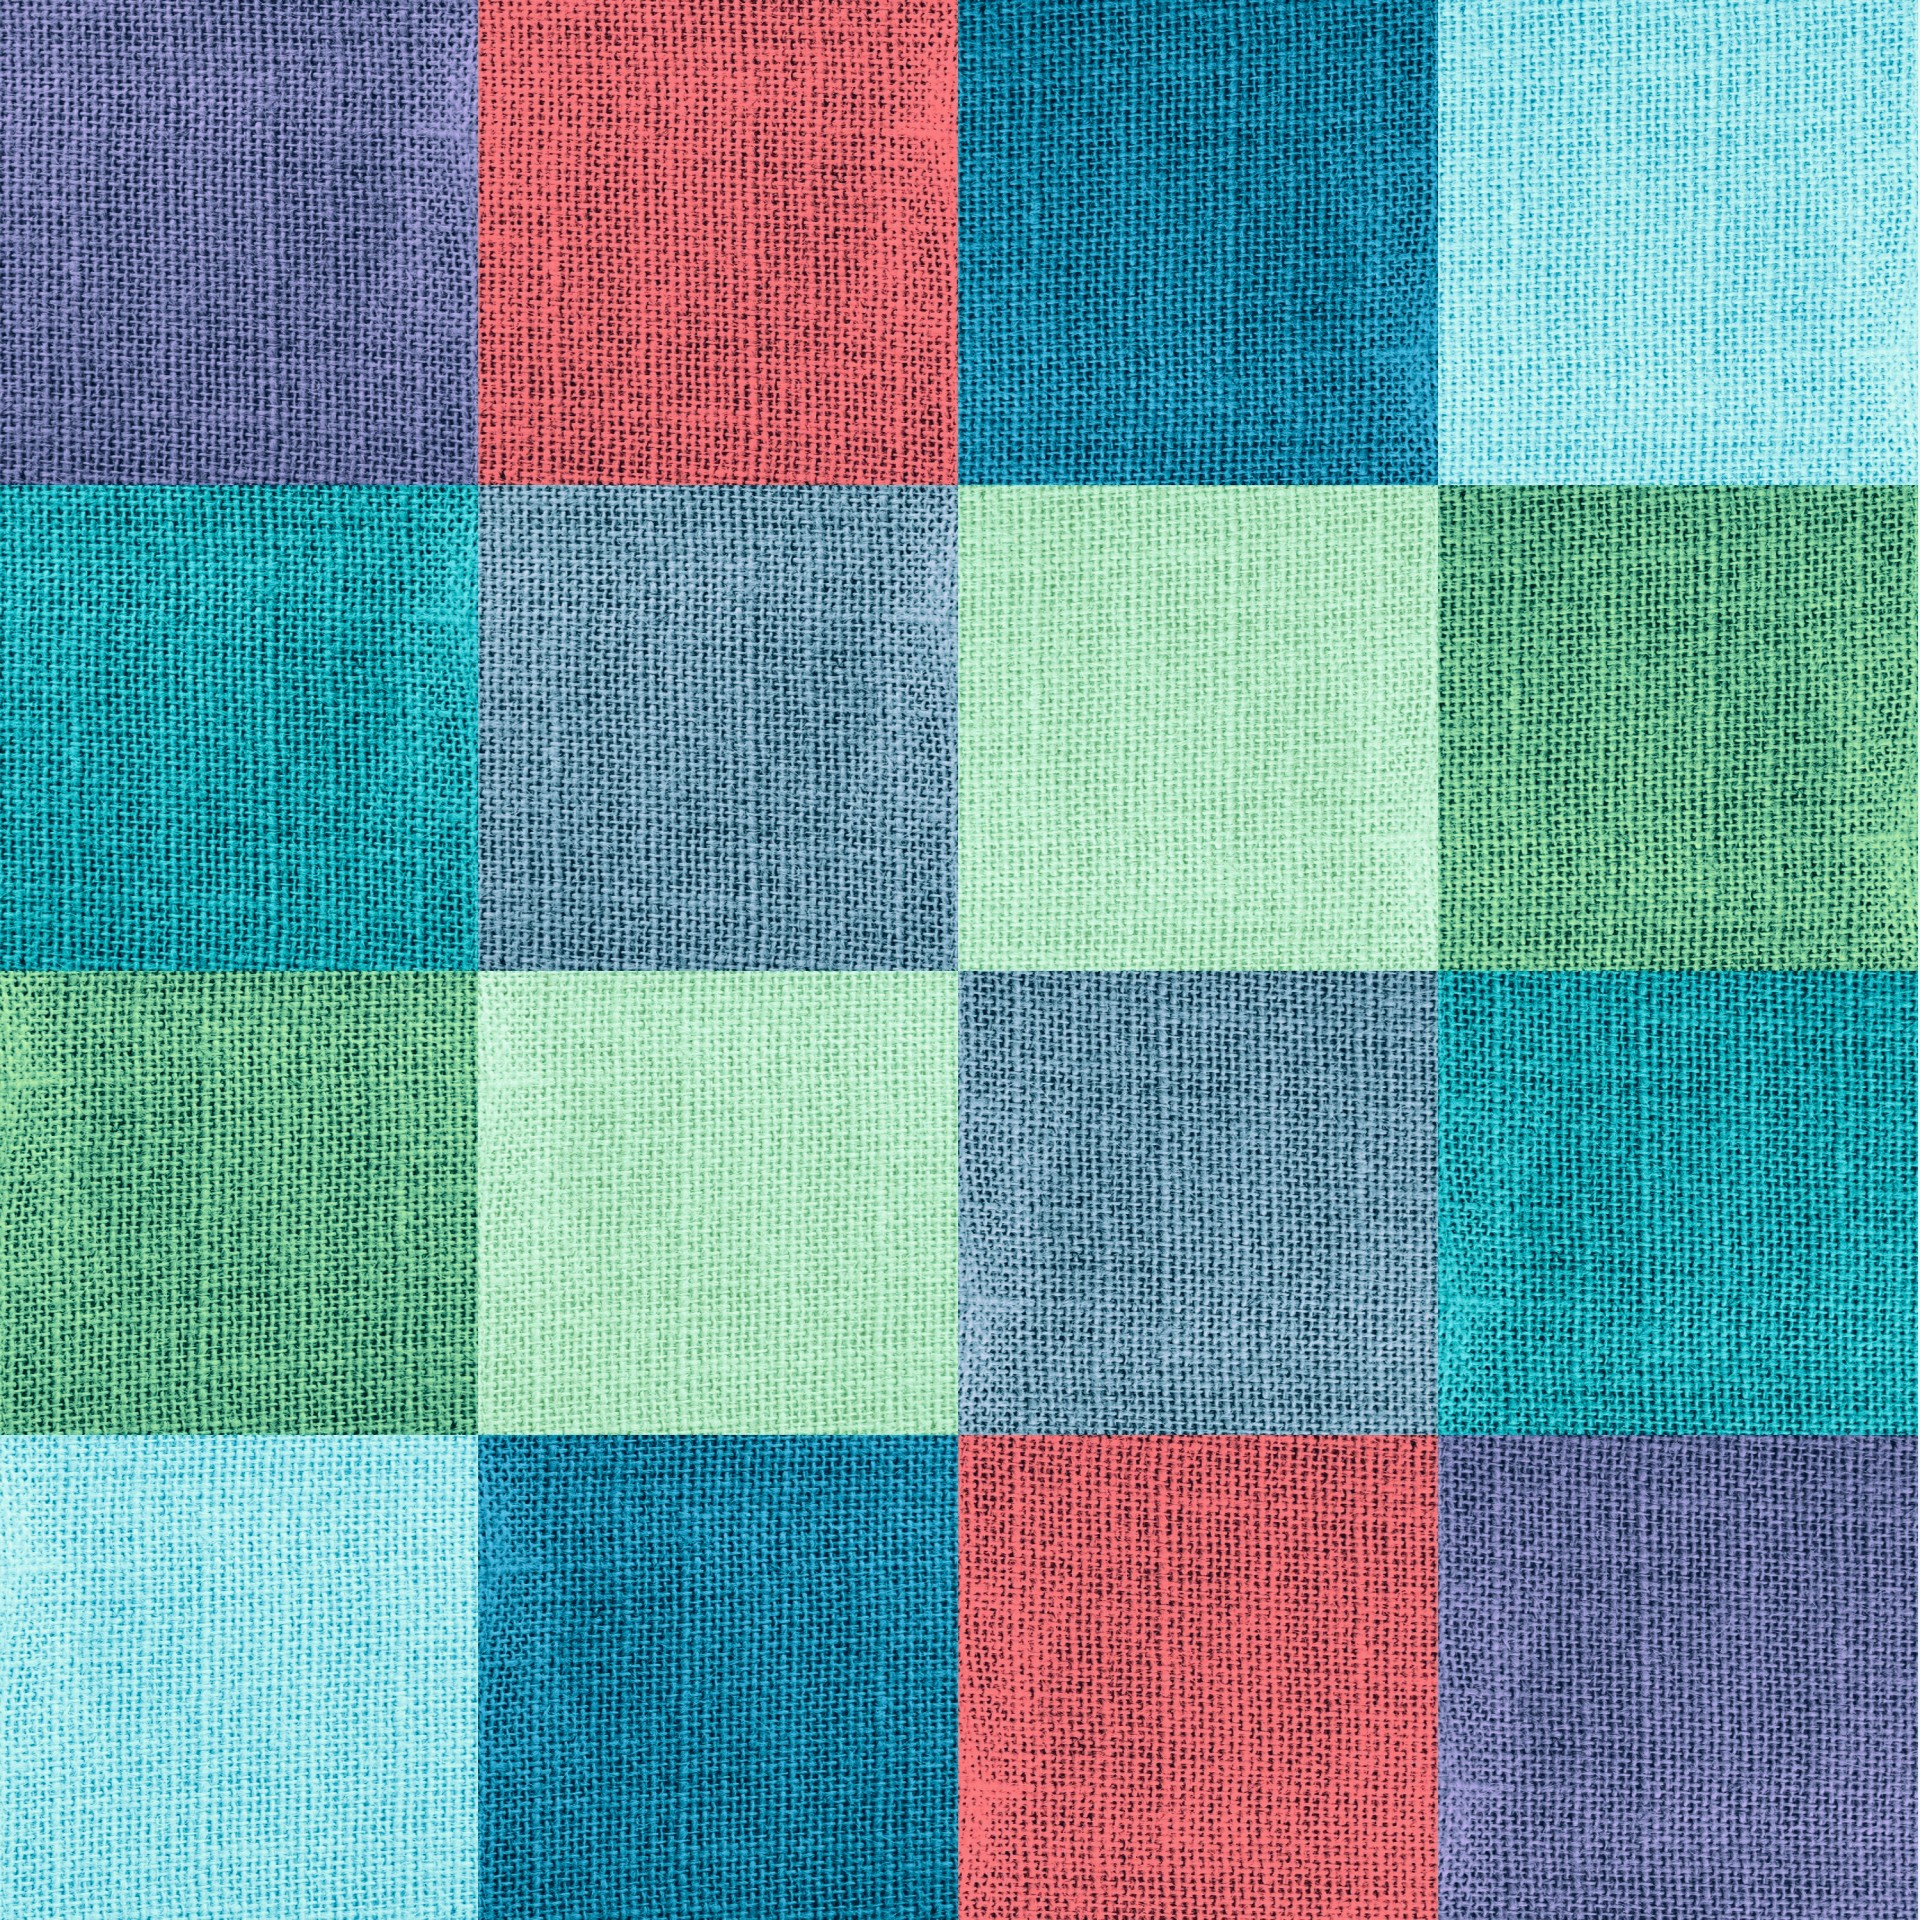 Checked Squares Colorful Background